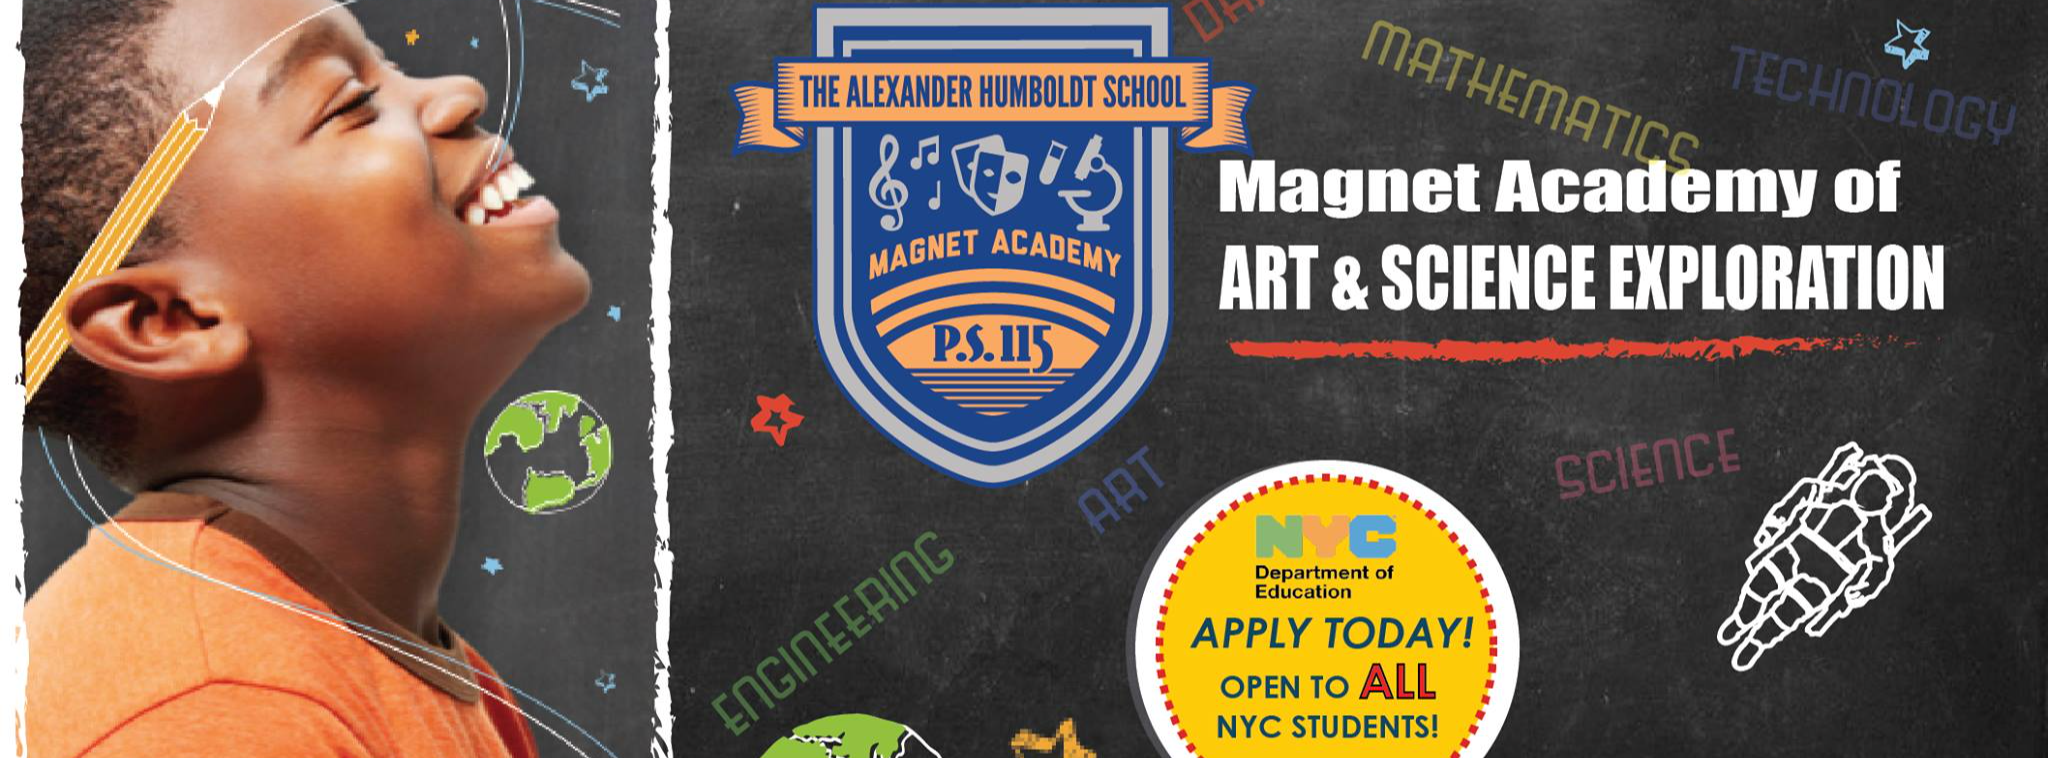 Magnet Academy of Art and Science